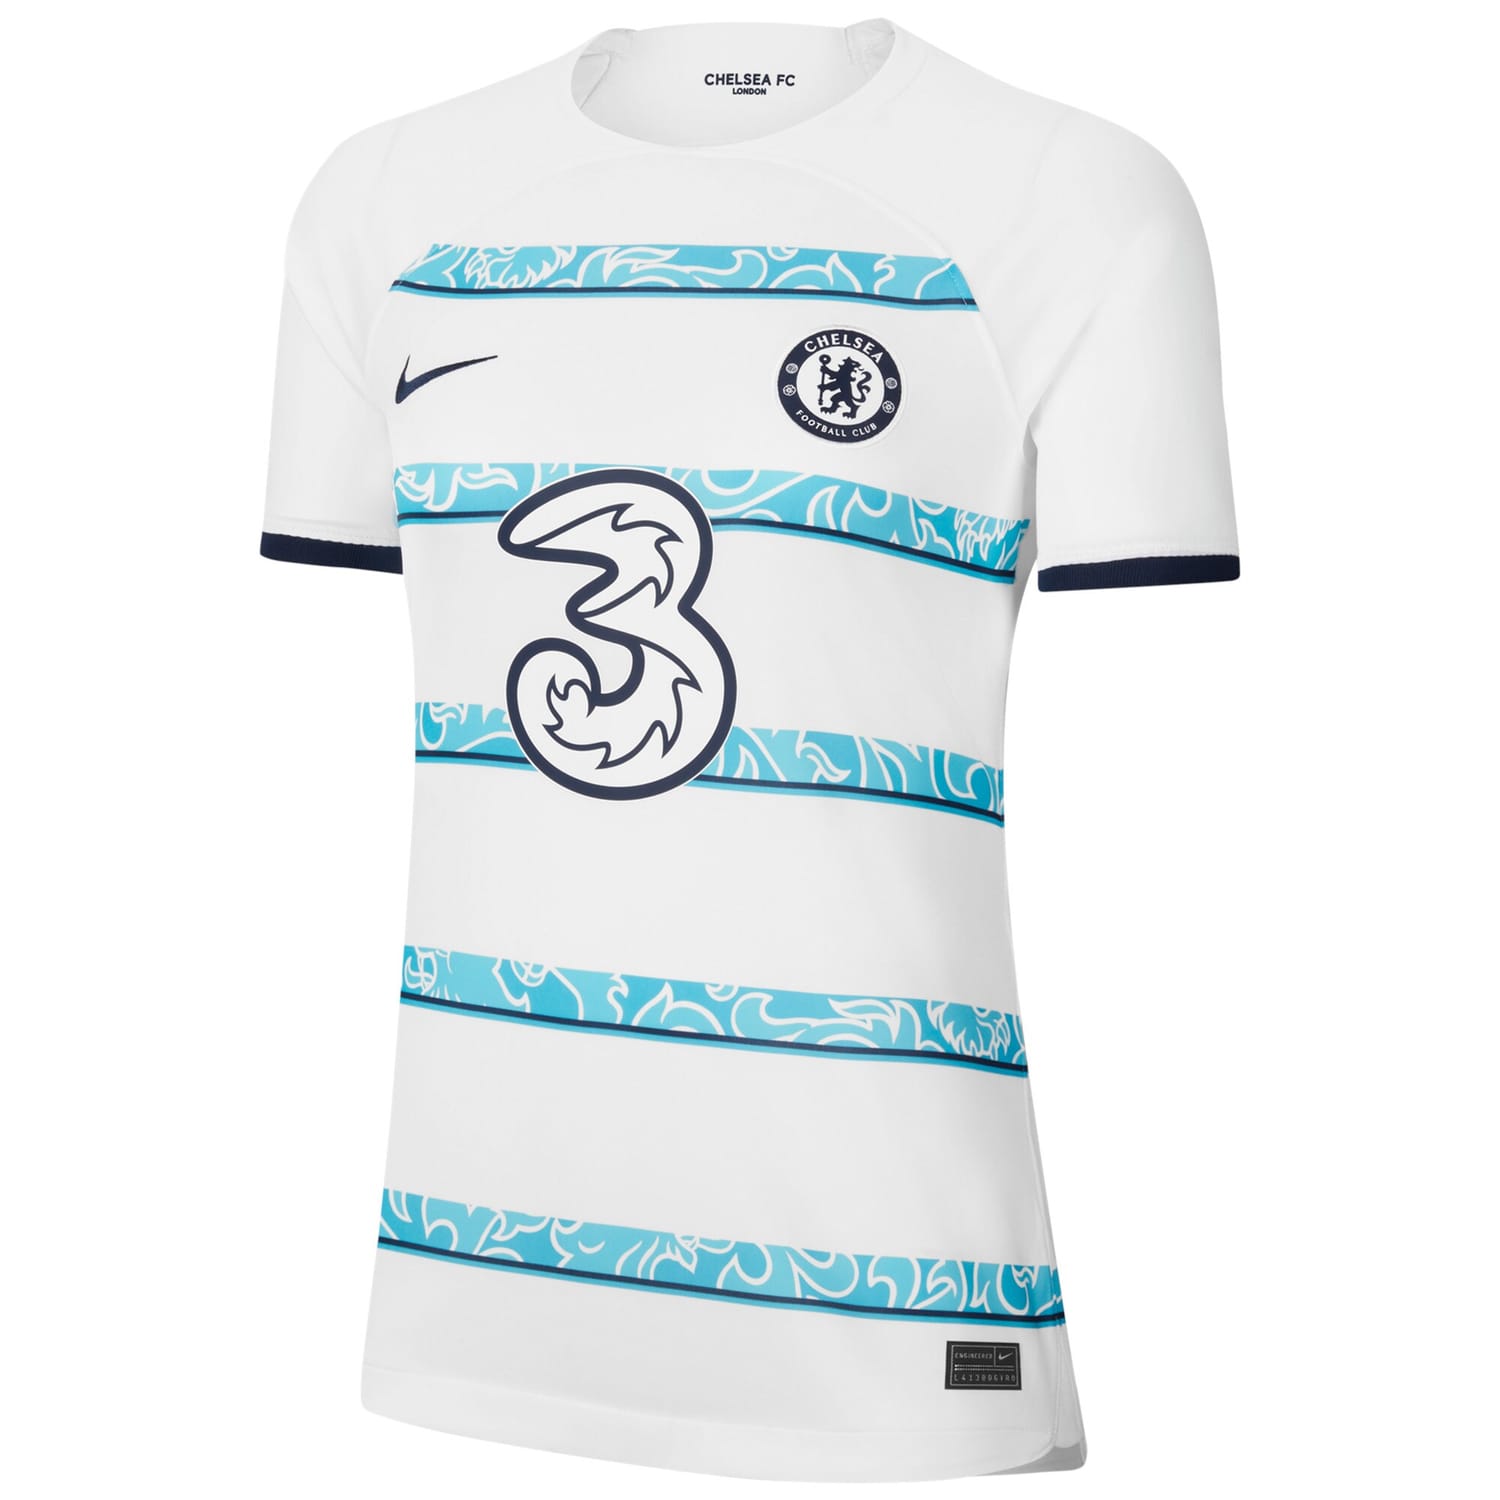 Premier League Chelsea Away Cup Jersey Shirt 2022-23 player Enzo Fernández 5 printing for Women